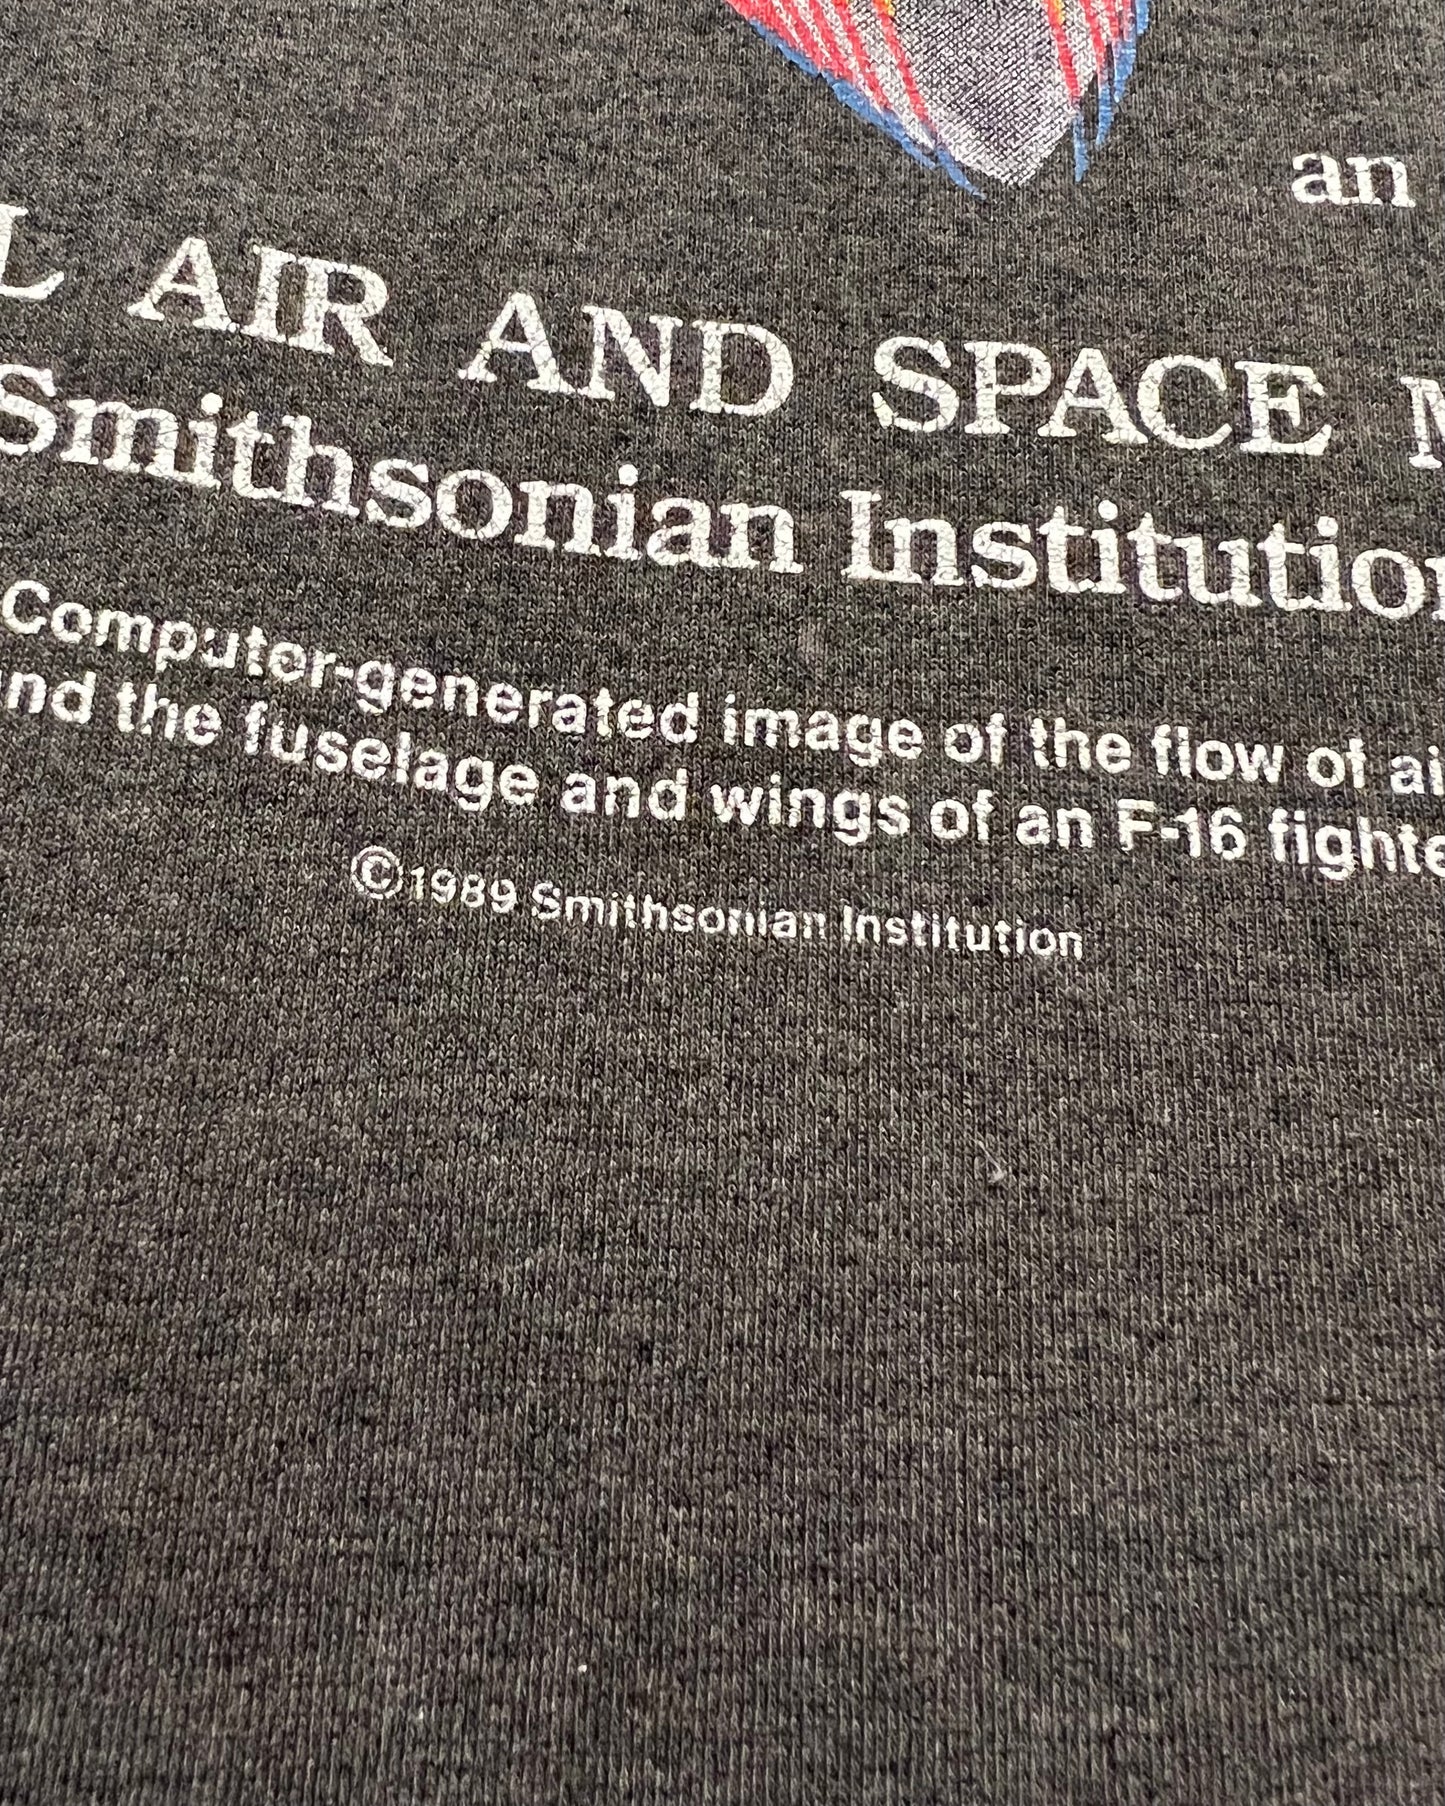 1989 "Beyond the Limits" National Air and Space Museum Single Stitch T-Shirt